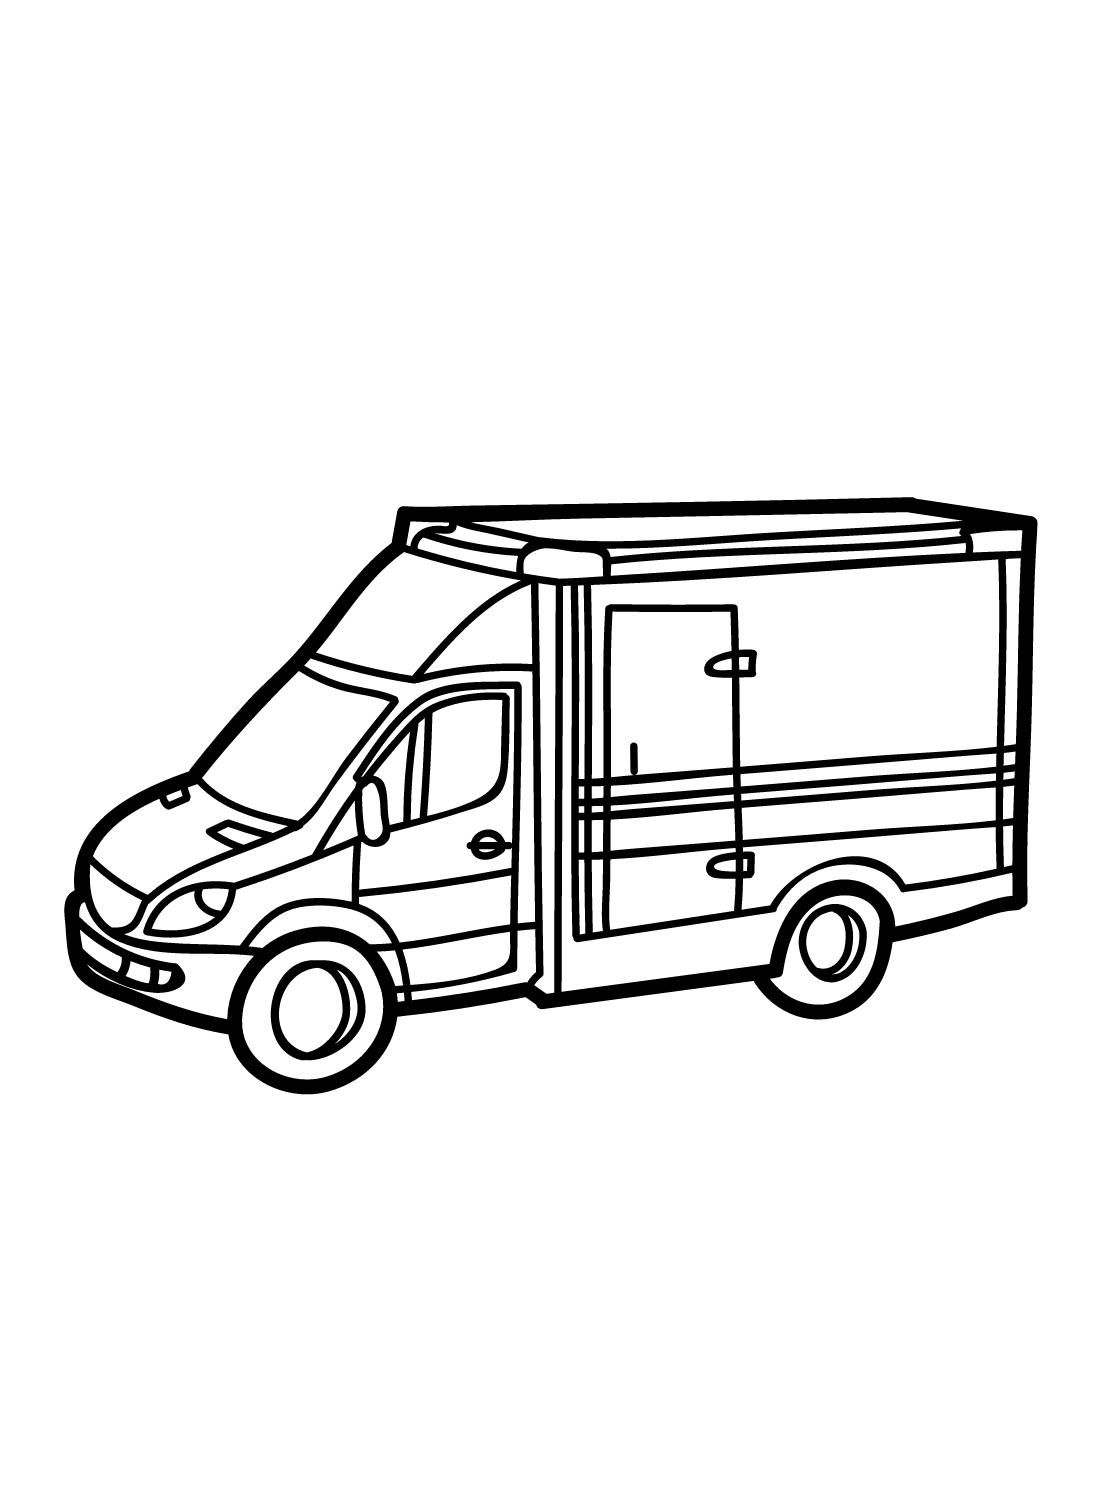 Printable Ambulance Images Coloring Pages